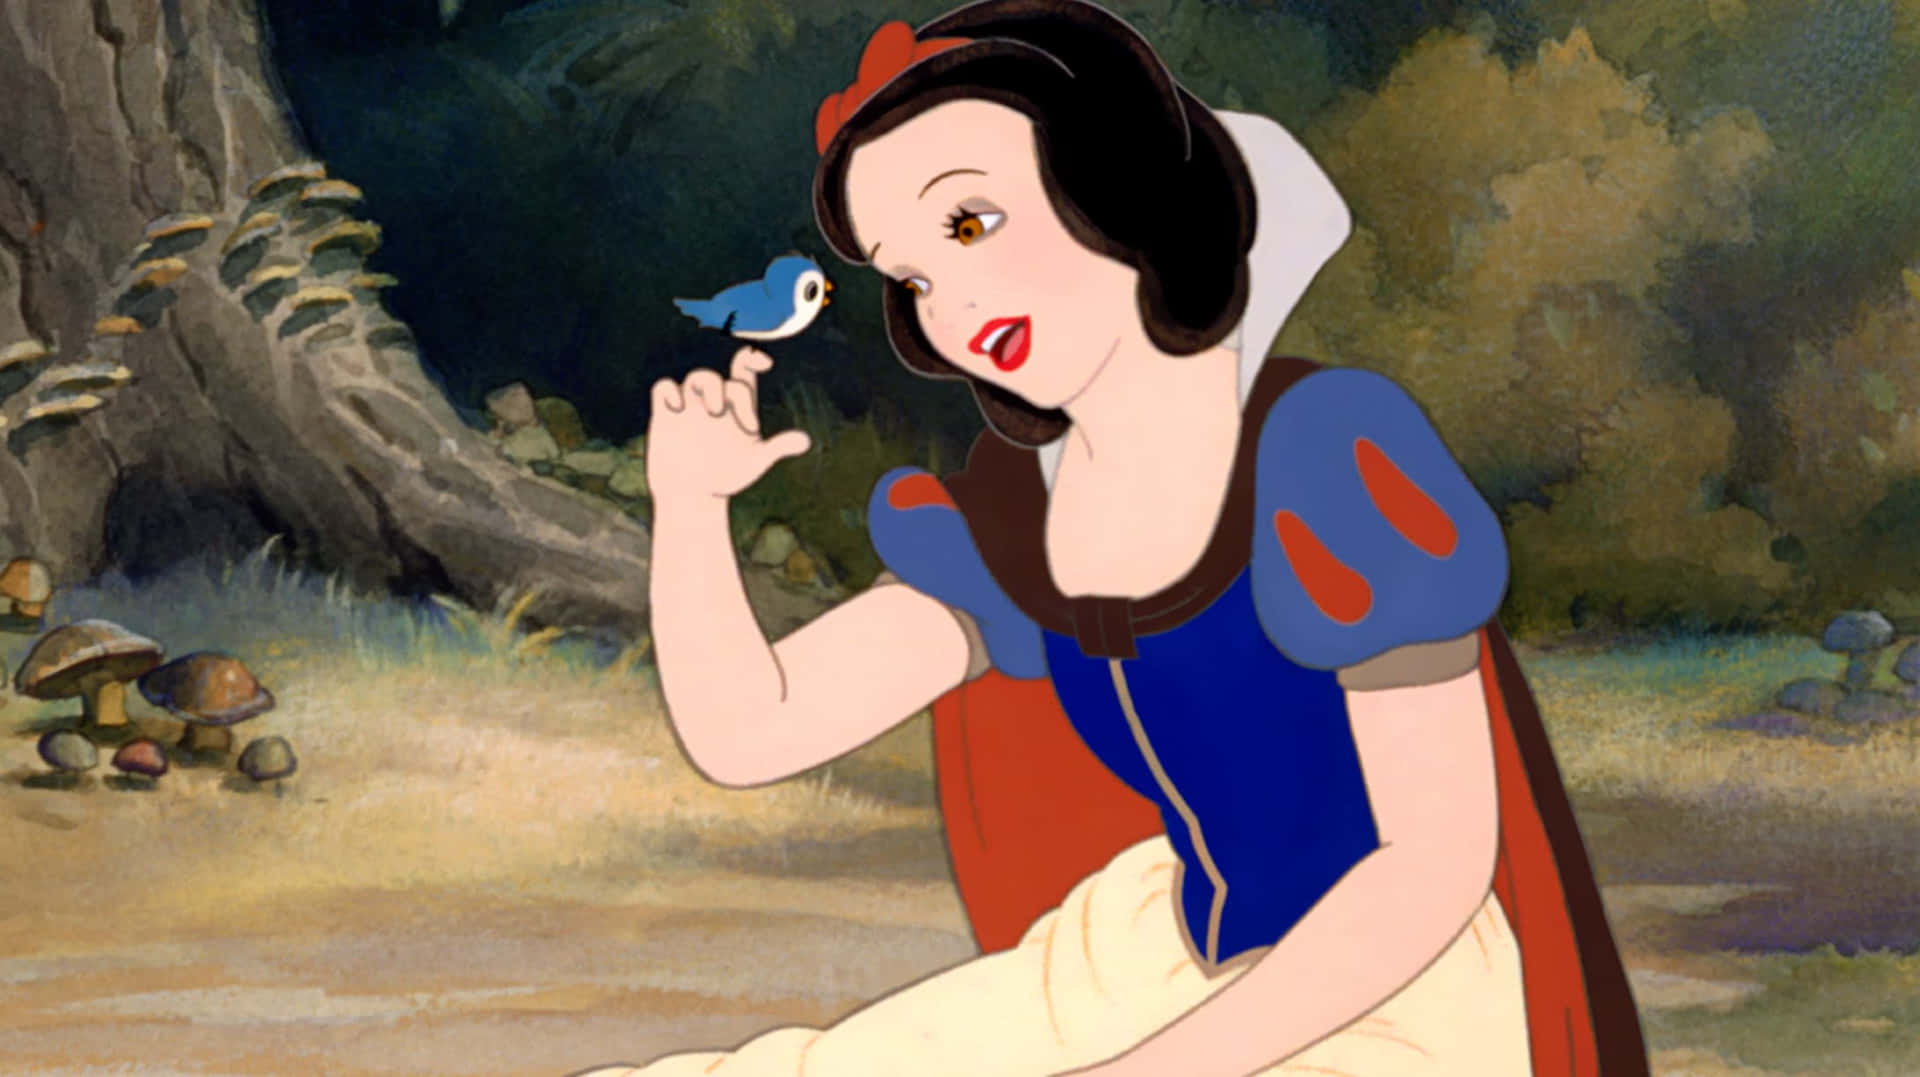 Snow White, a beautiful princess living in a world of magic